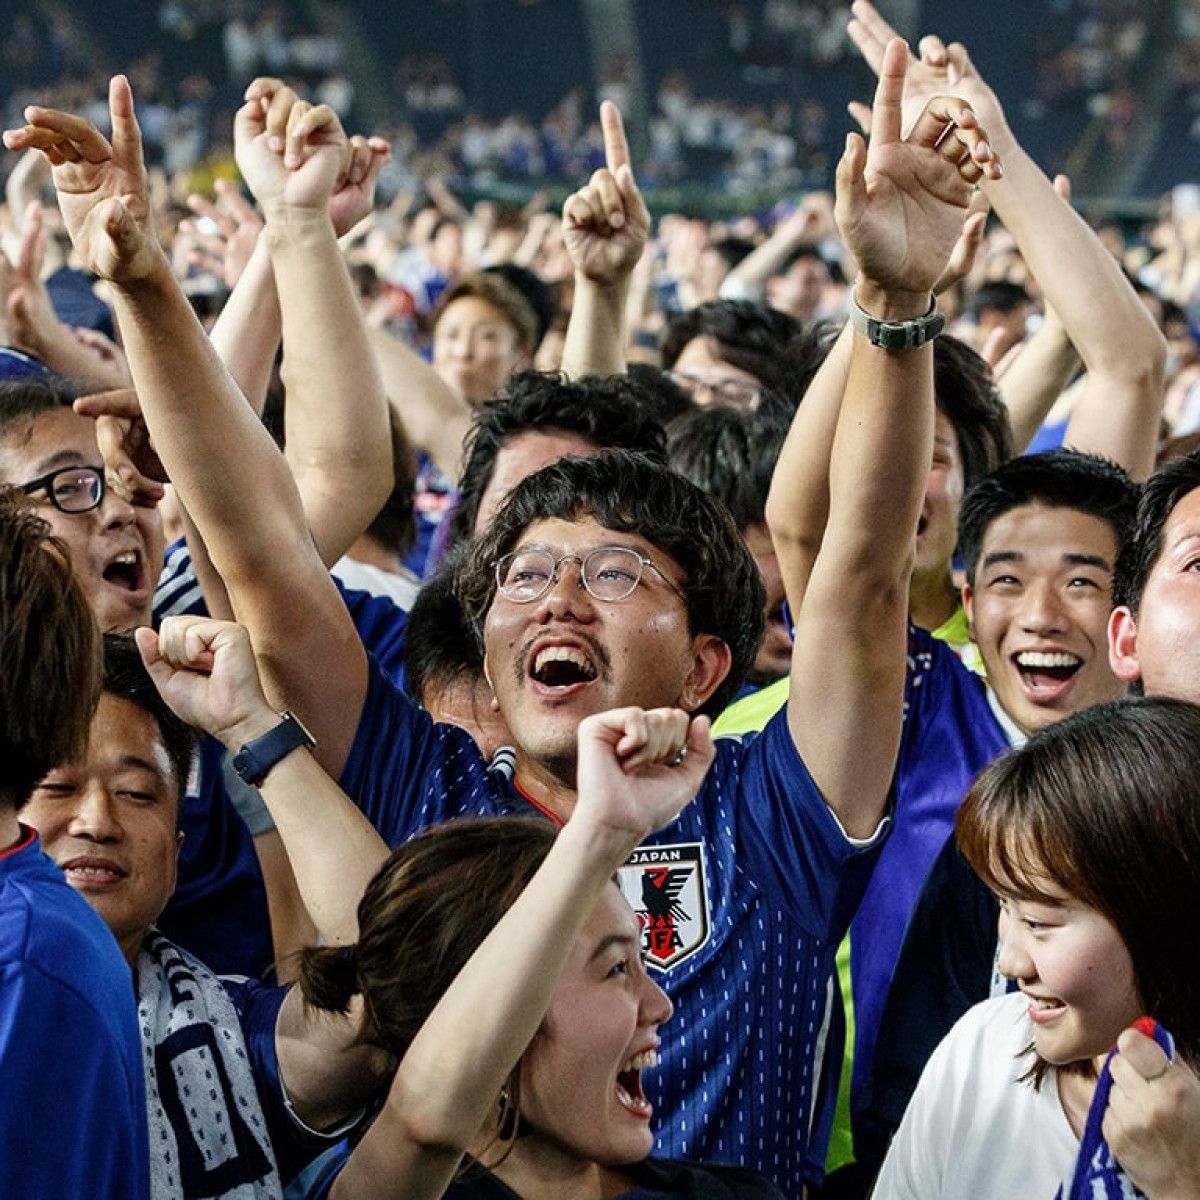 Japan's World Cup fans cleaned up the stadium after they won. Now others  are doing it. - Vox